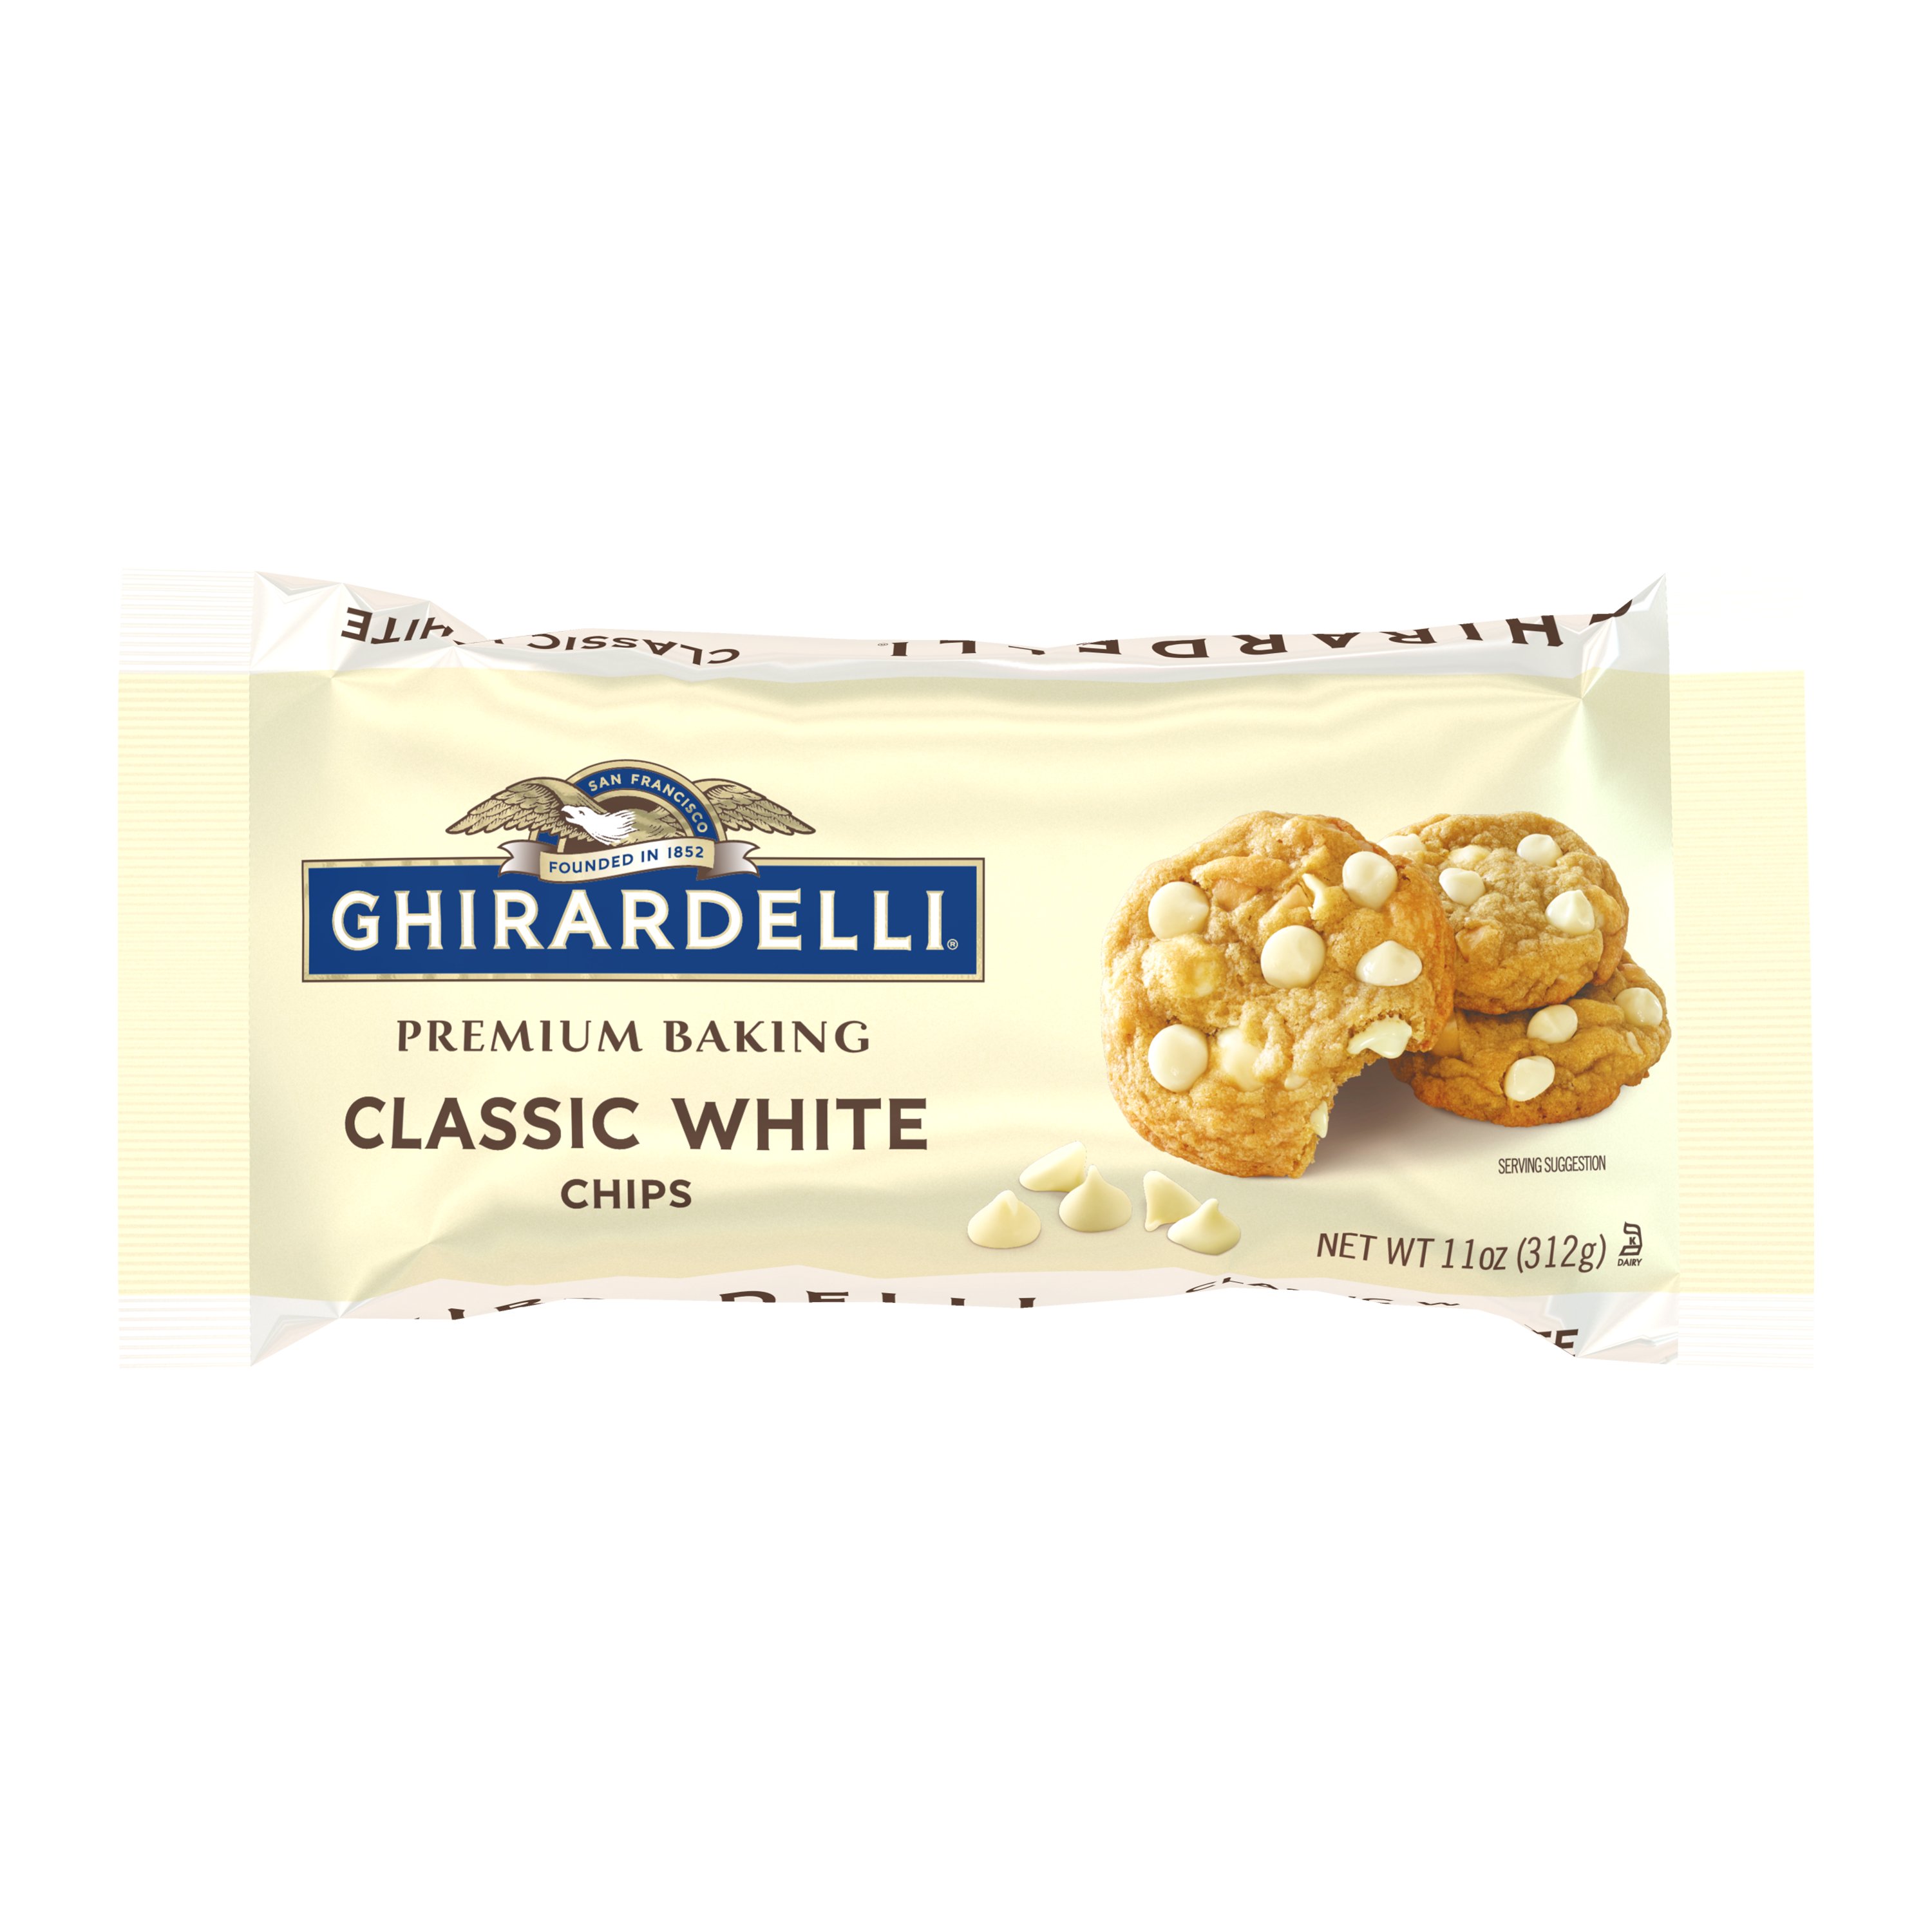 Ghirardelli Classic White Chocolate Premium Baking Chips Shop Baking Chocolate Candies At H E B,What Does An Ionizer Do To Water